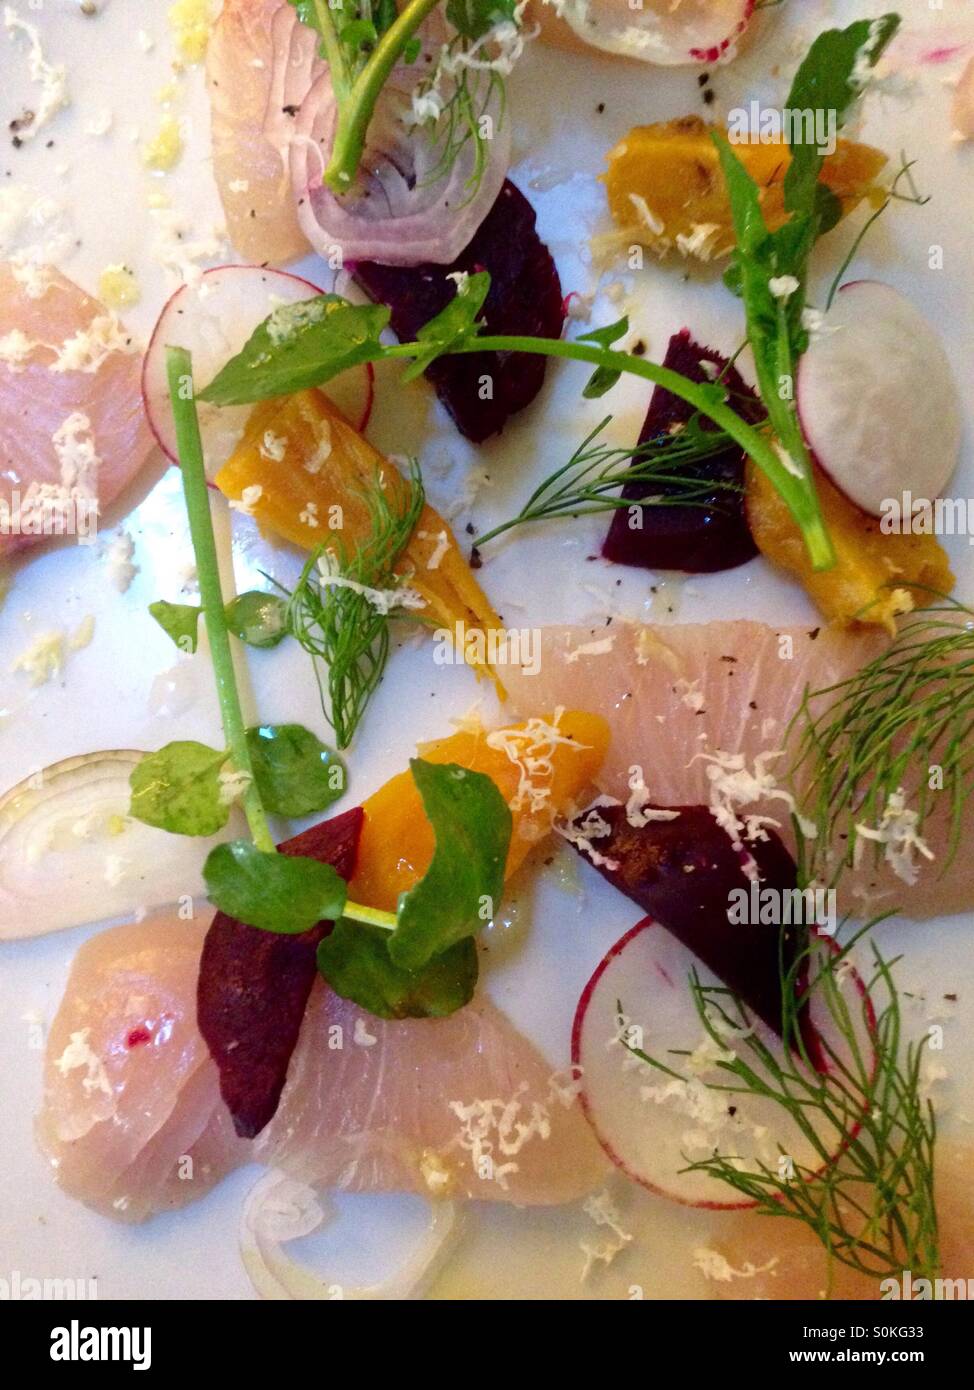 Fancy plated food with raw fish, dill, radishes and pickled vegetables Stock Photo